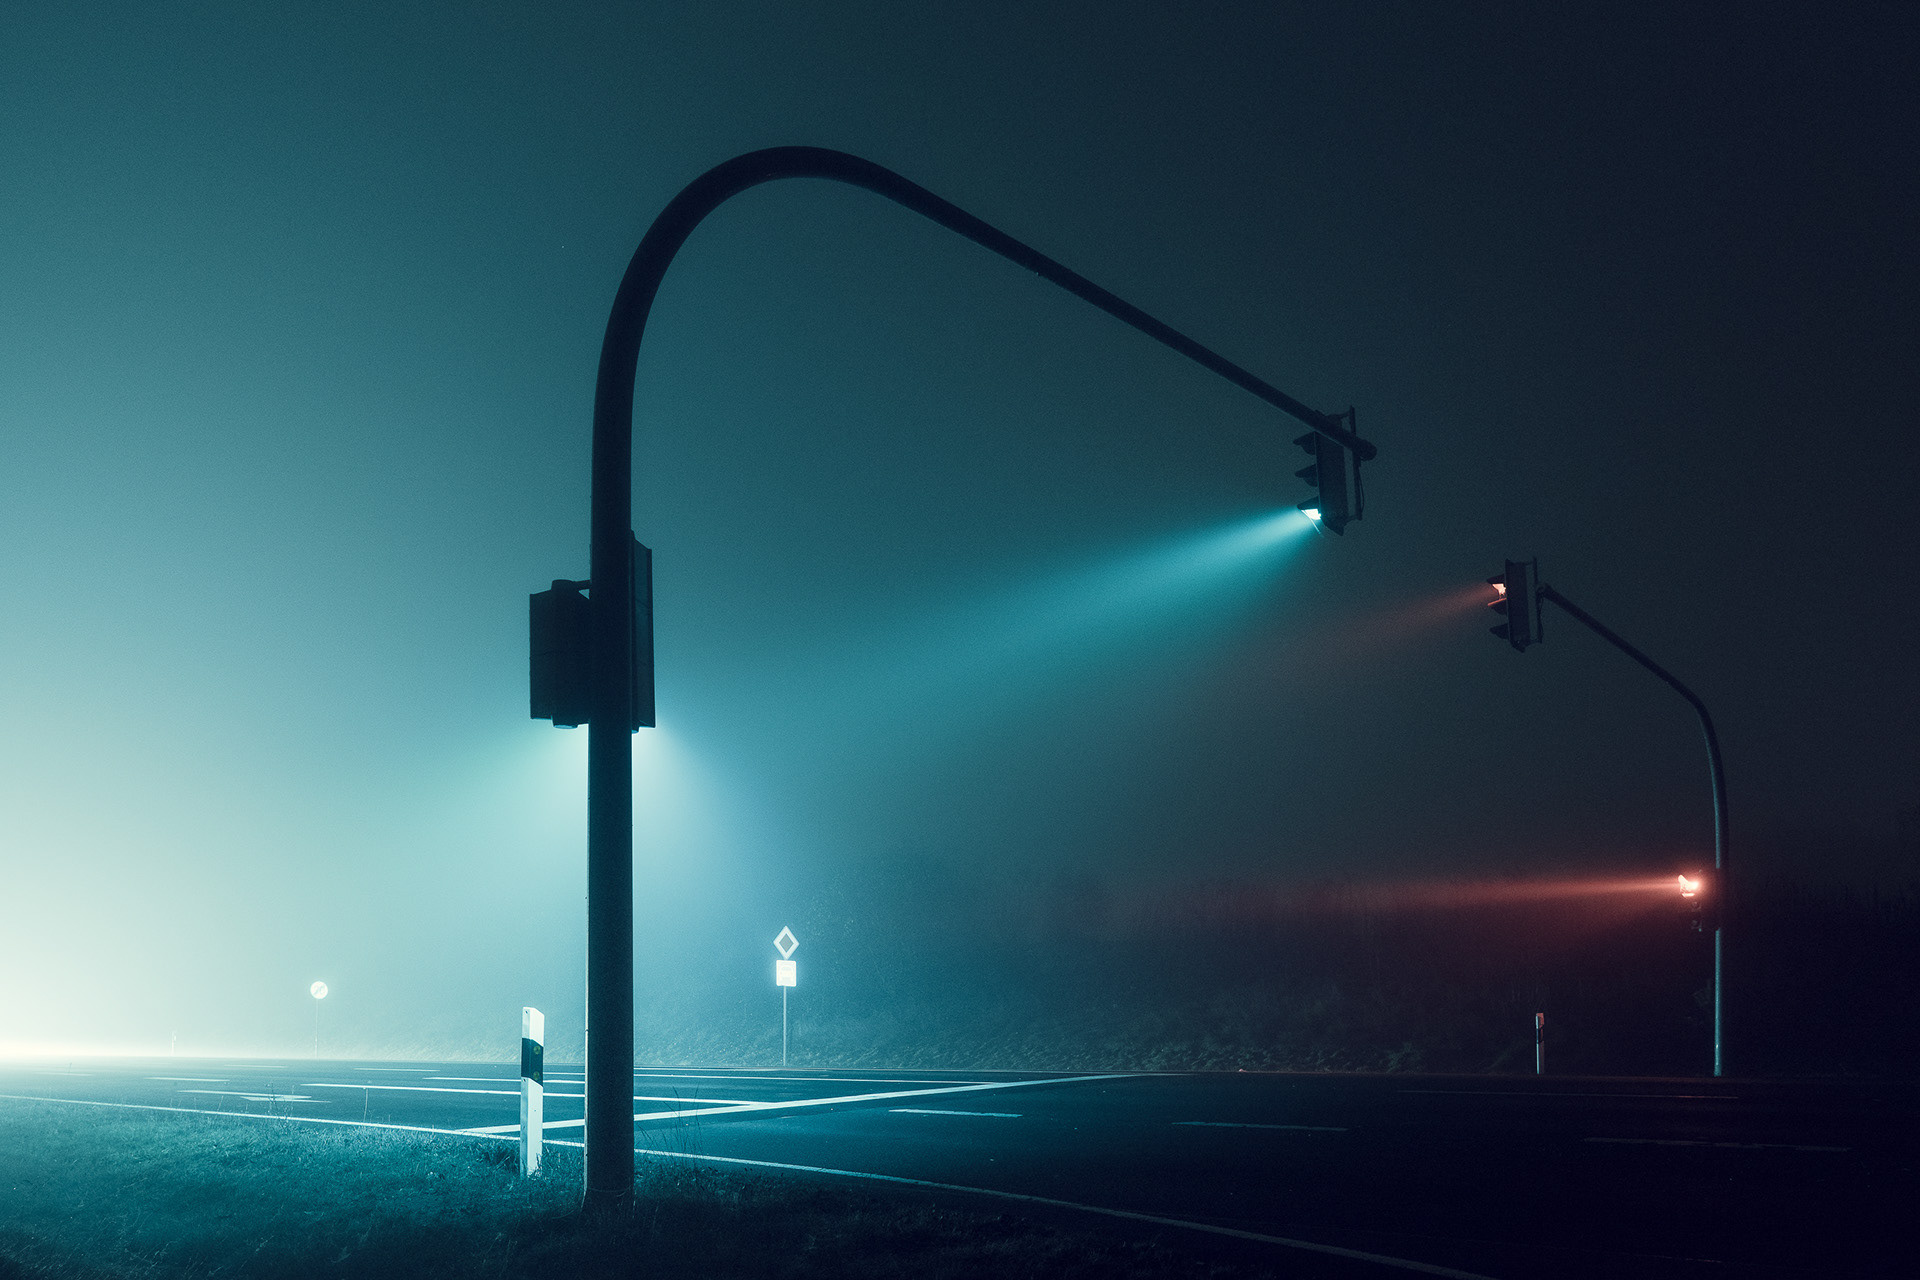 Andreas Levers - At Night 4